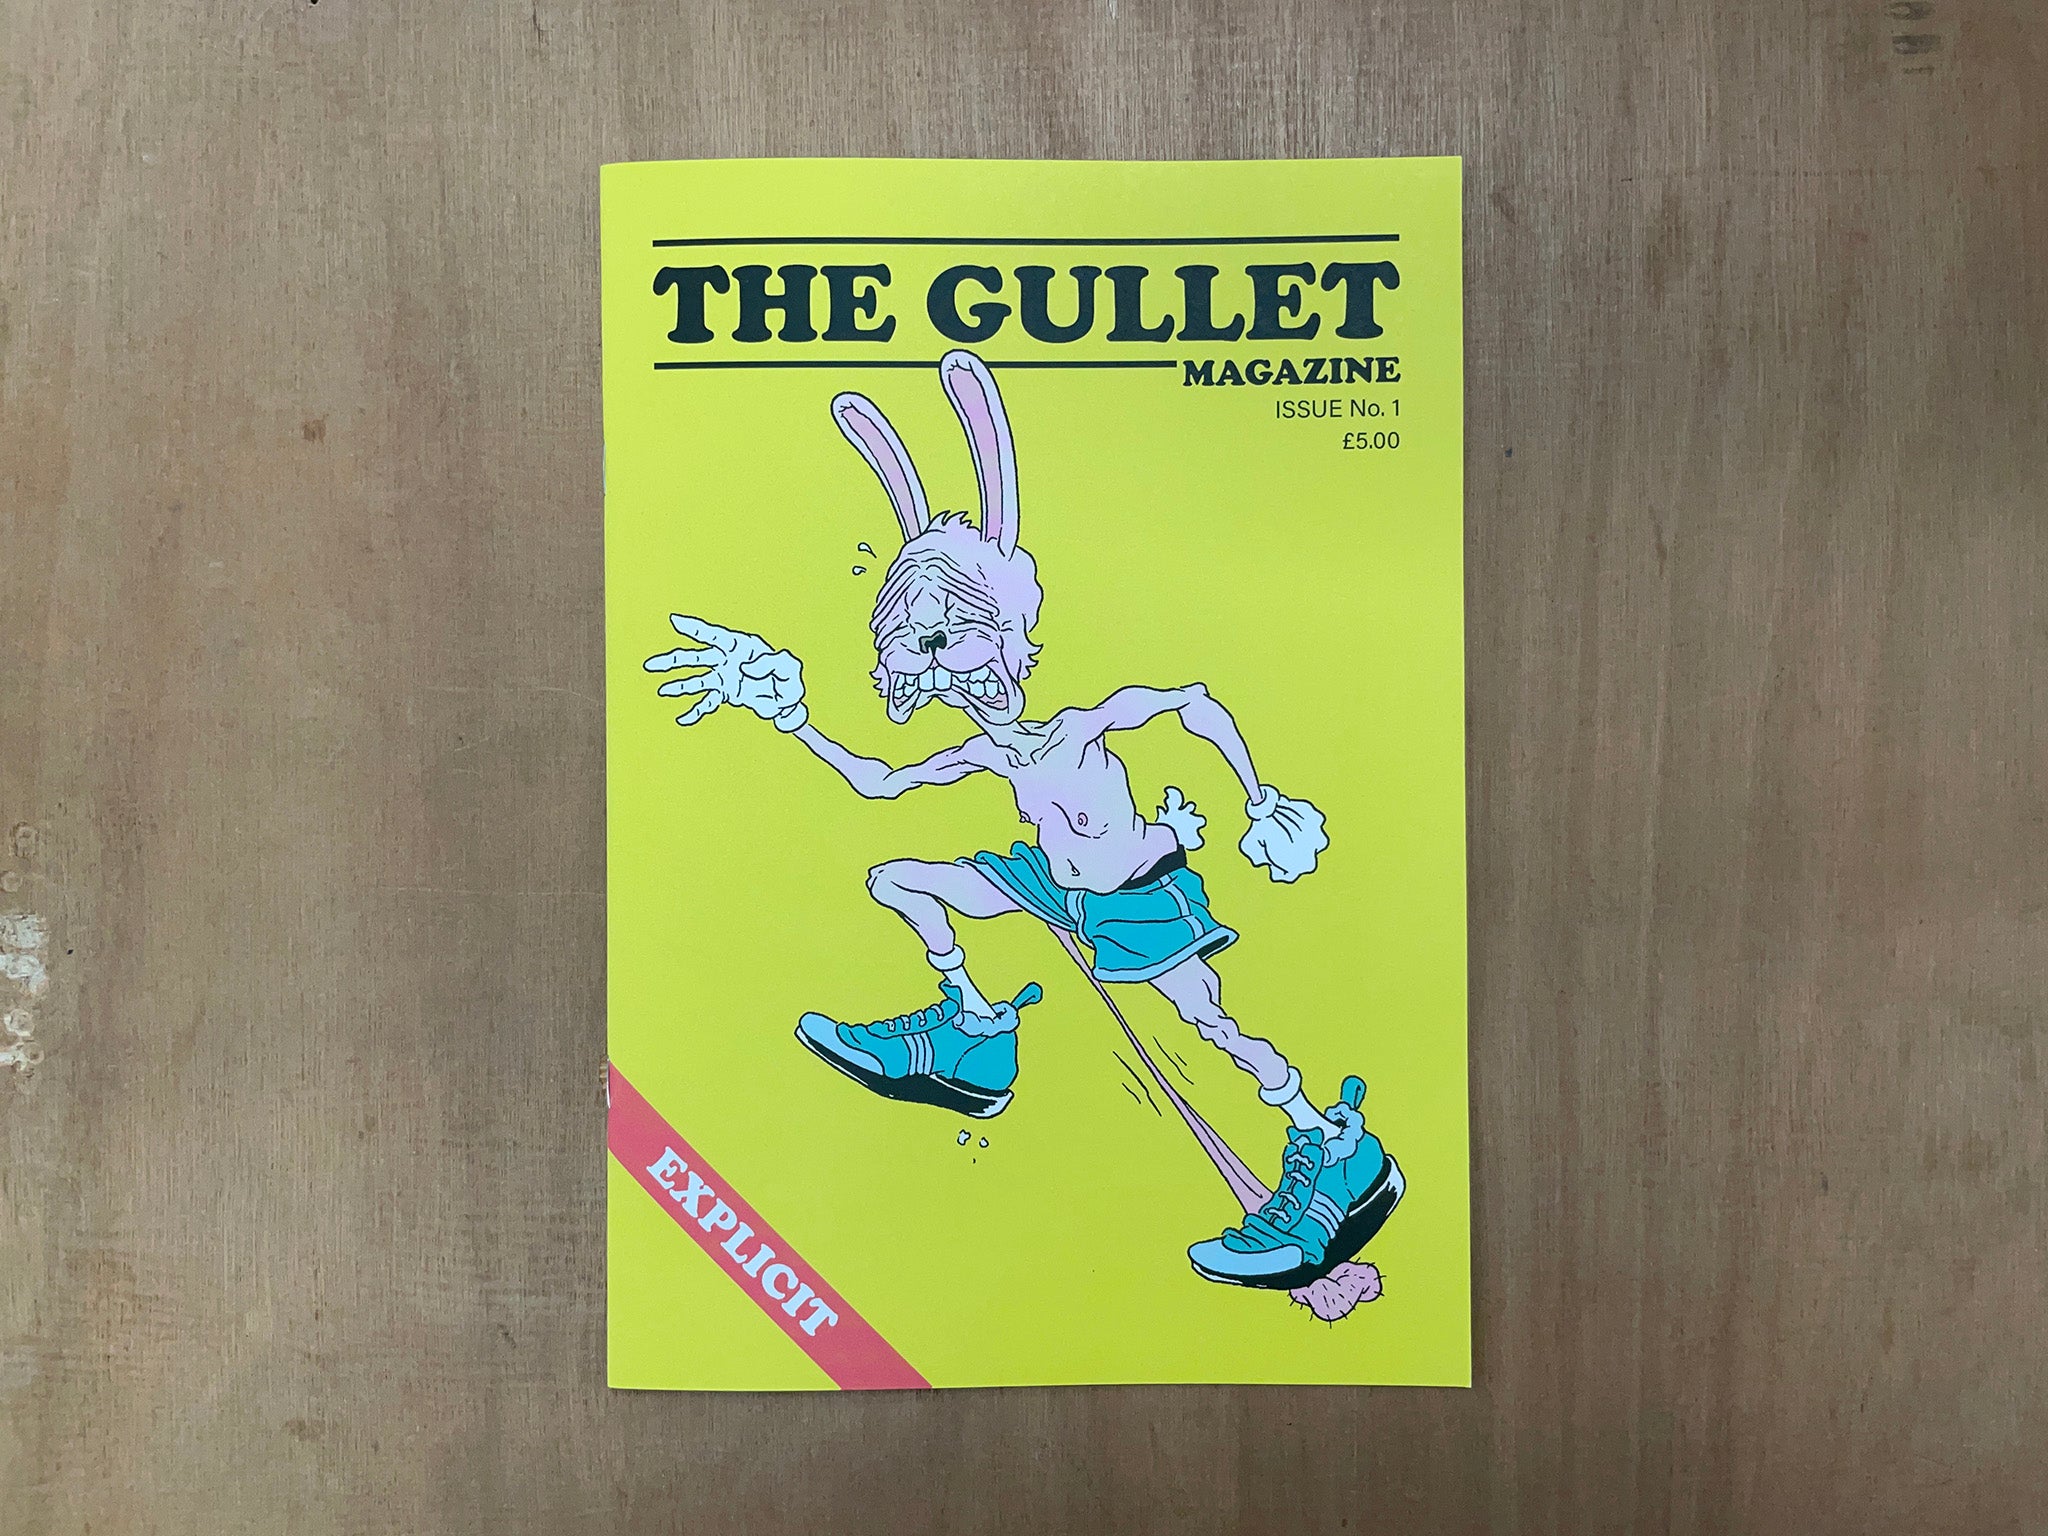 THE GULLET MAGAZINE: ISSUE 1